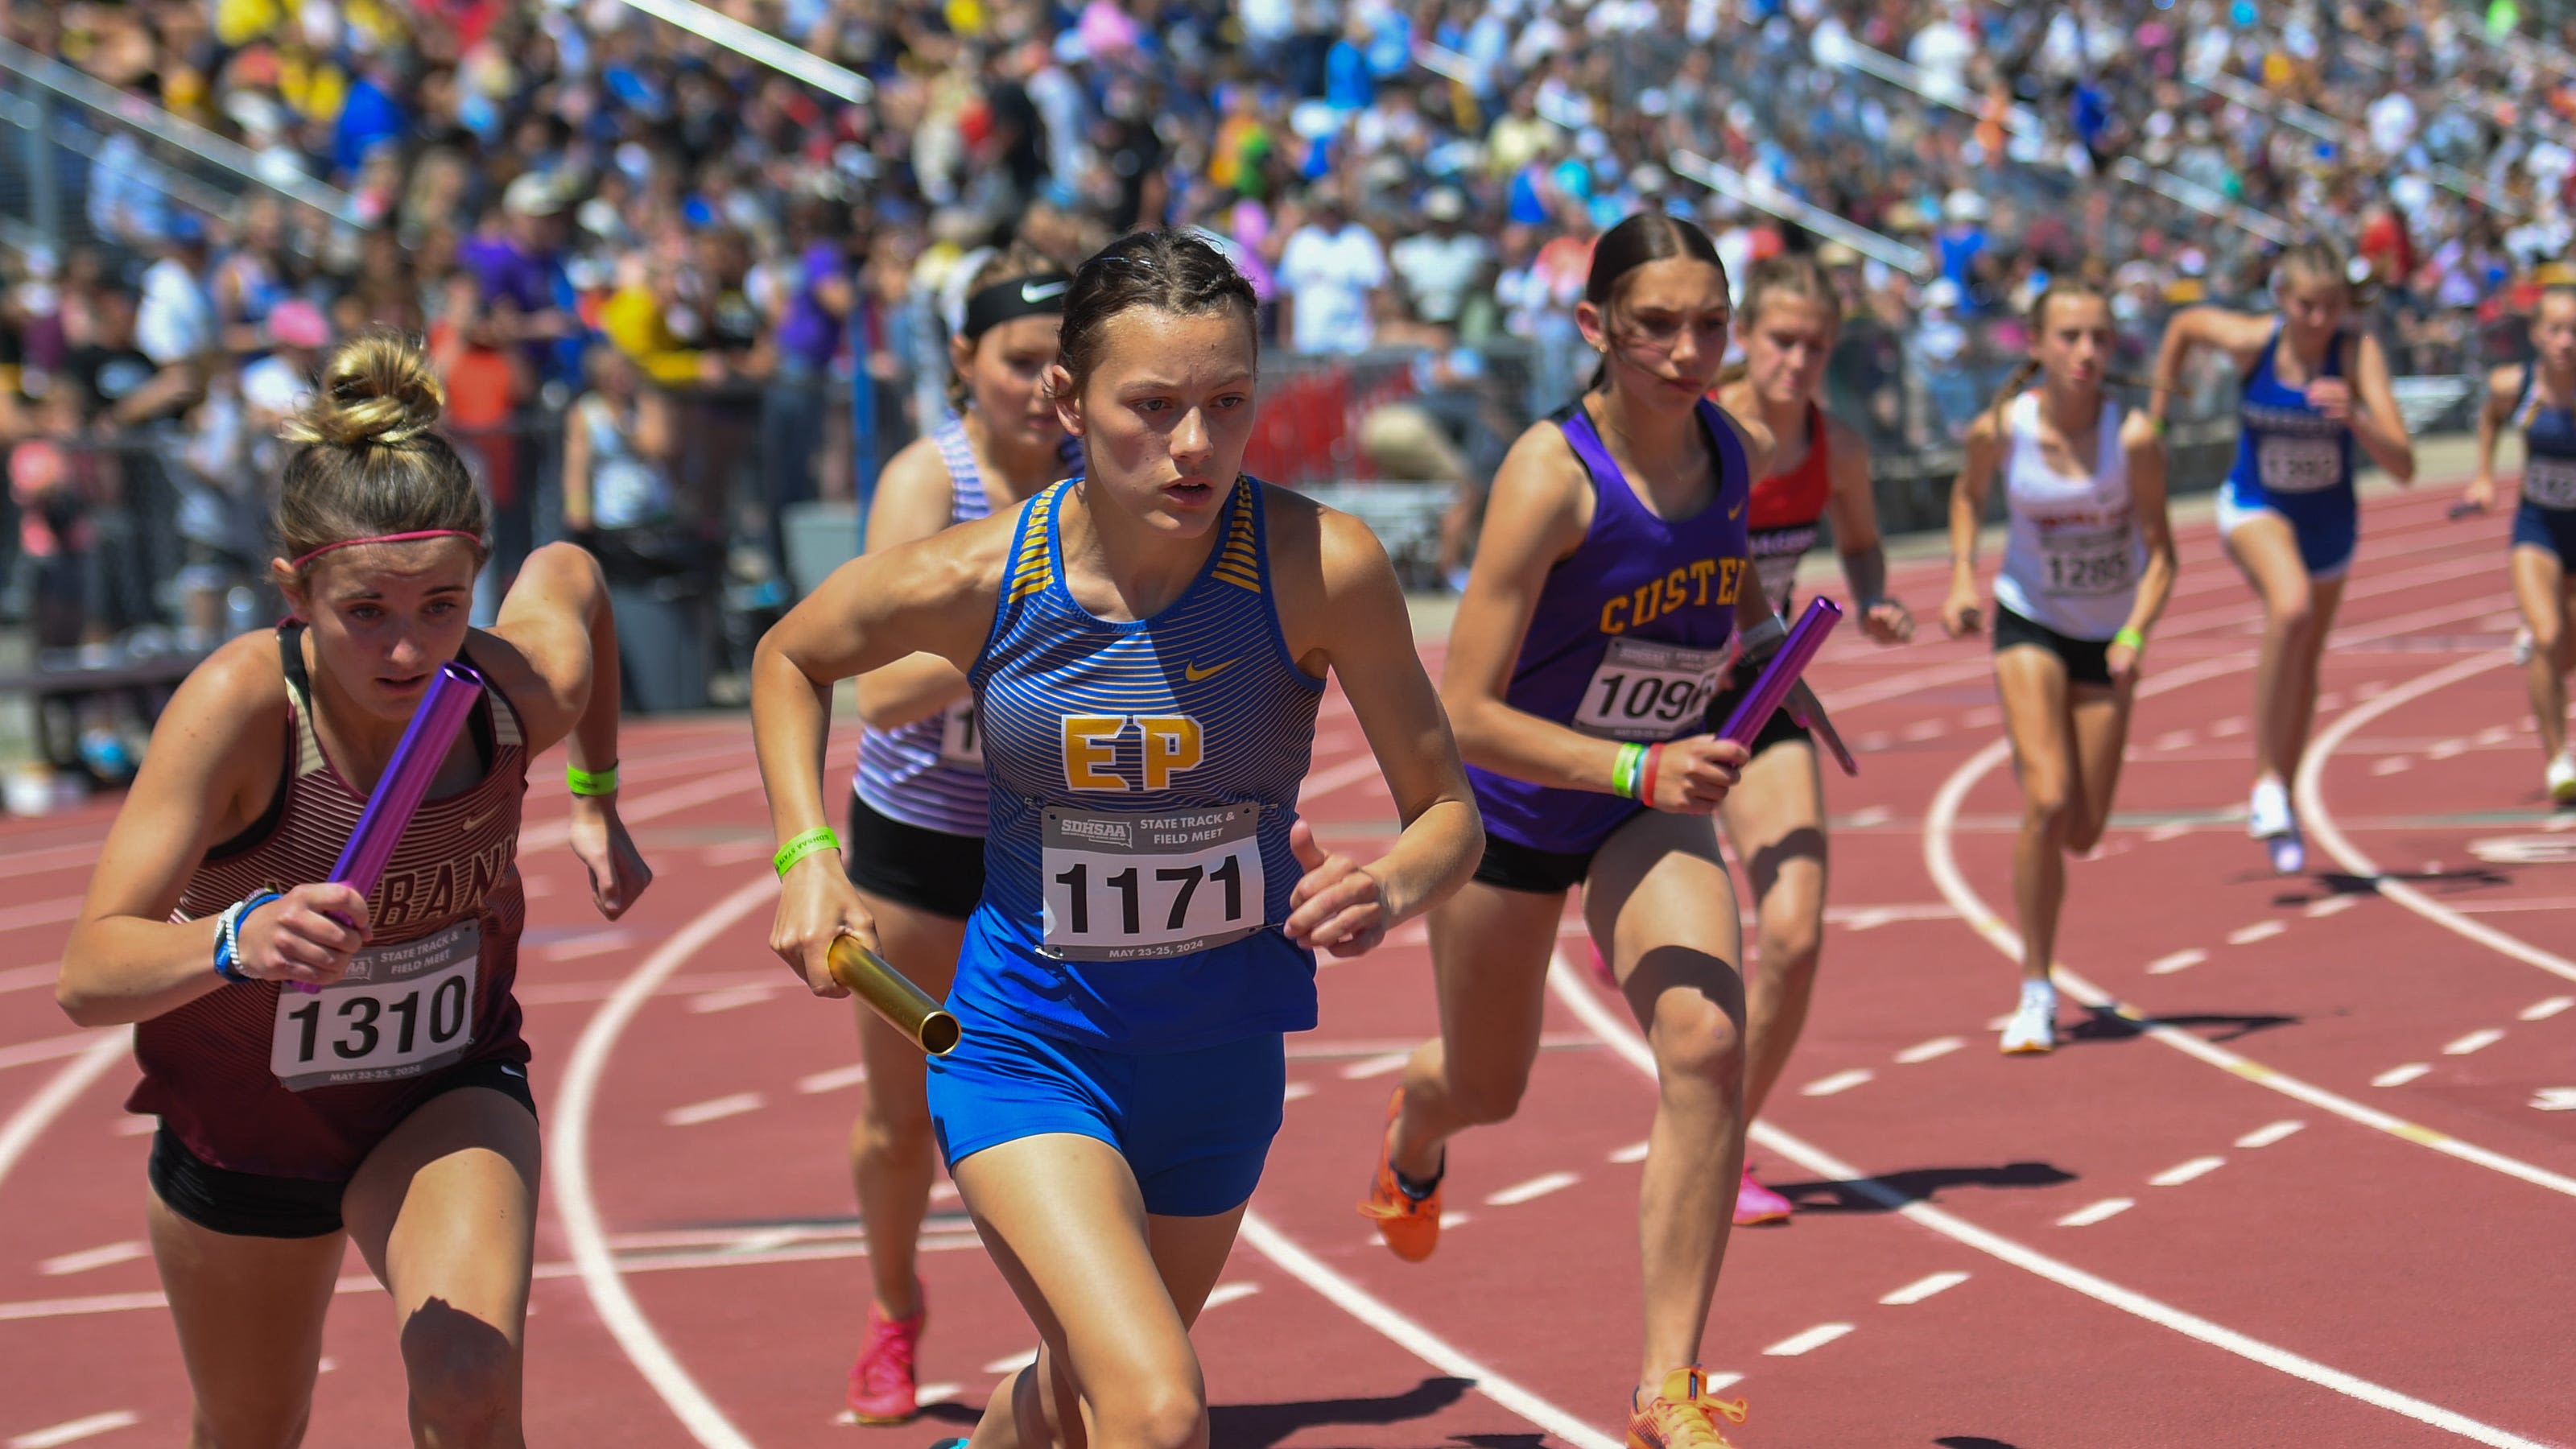 Thursday results from the South Dakota high school state high school track and field meet